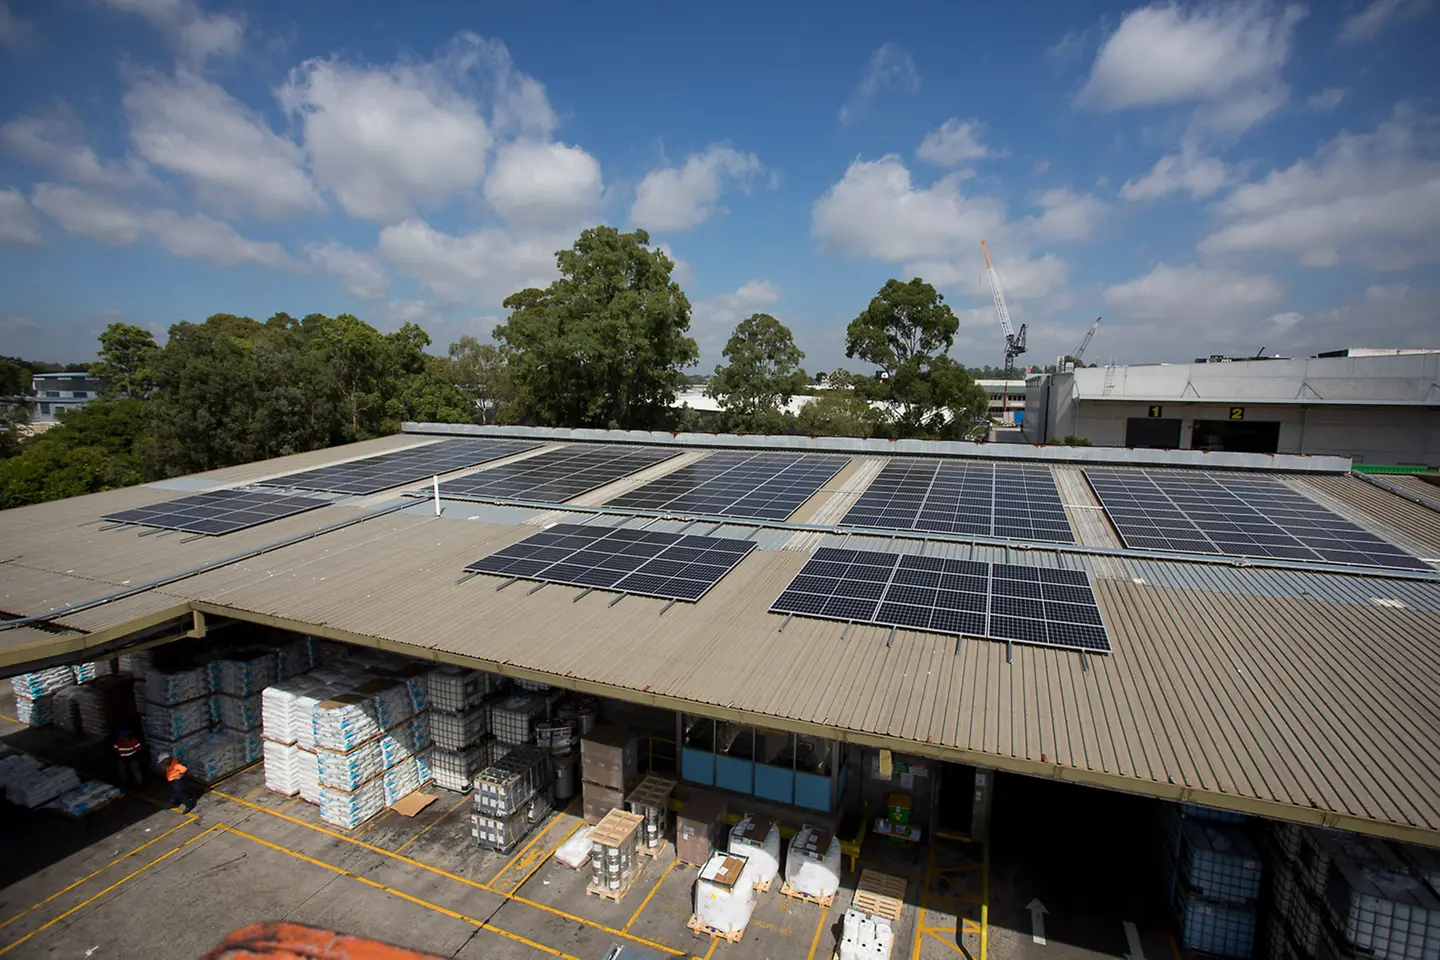 
More than 2,000 solar panels have been installed on the roofs of the office, manufacturing, and warehouse buildings at Henkel’s Adhesive Technologies sites in Seven Hills and Kilsyth.